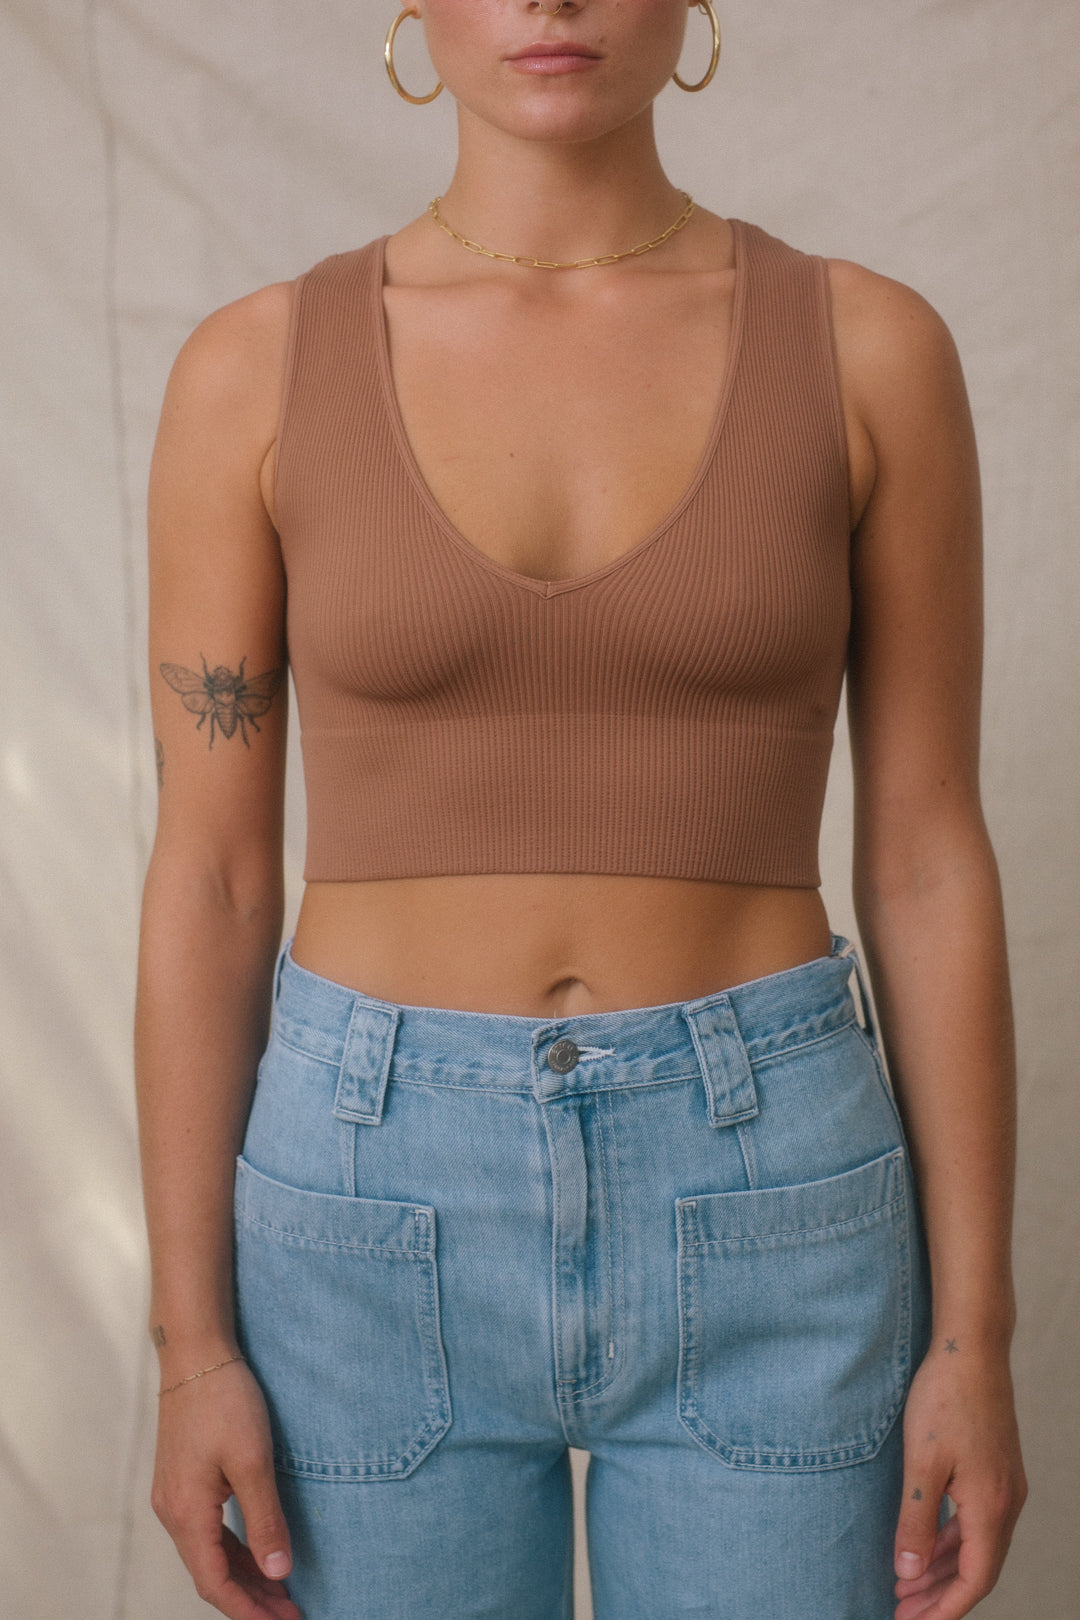 Women's Cropped Tops - Shop Online Now